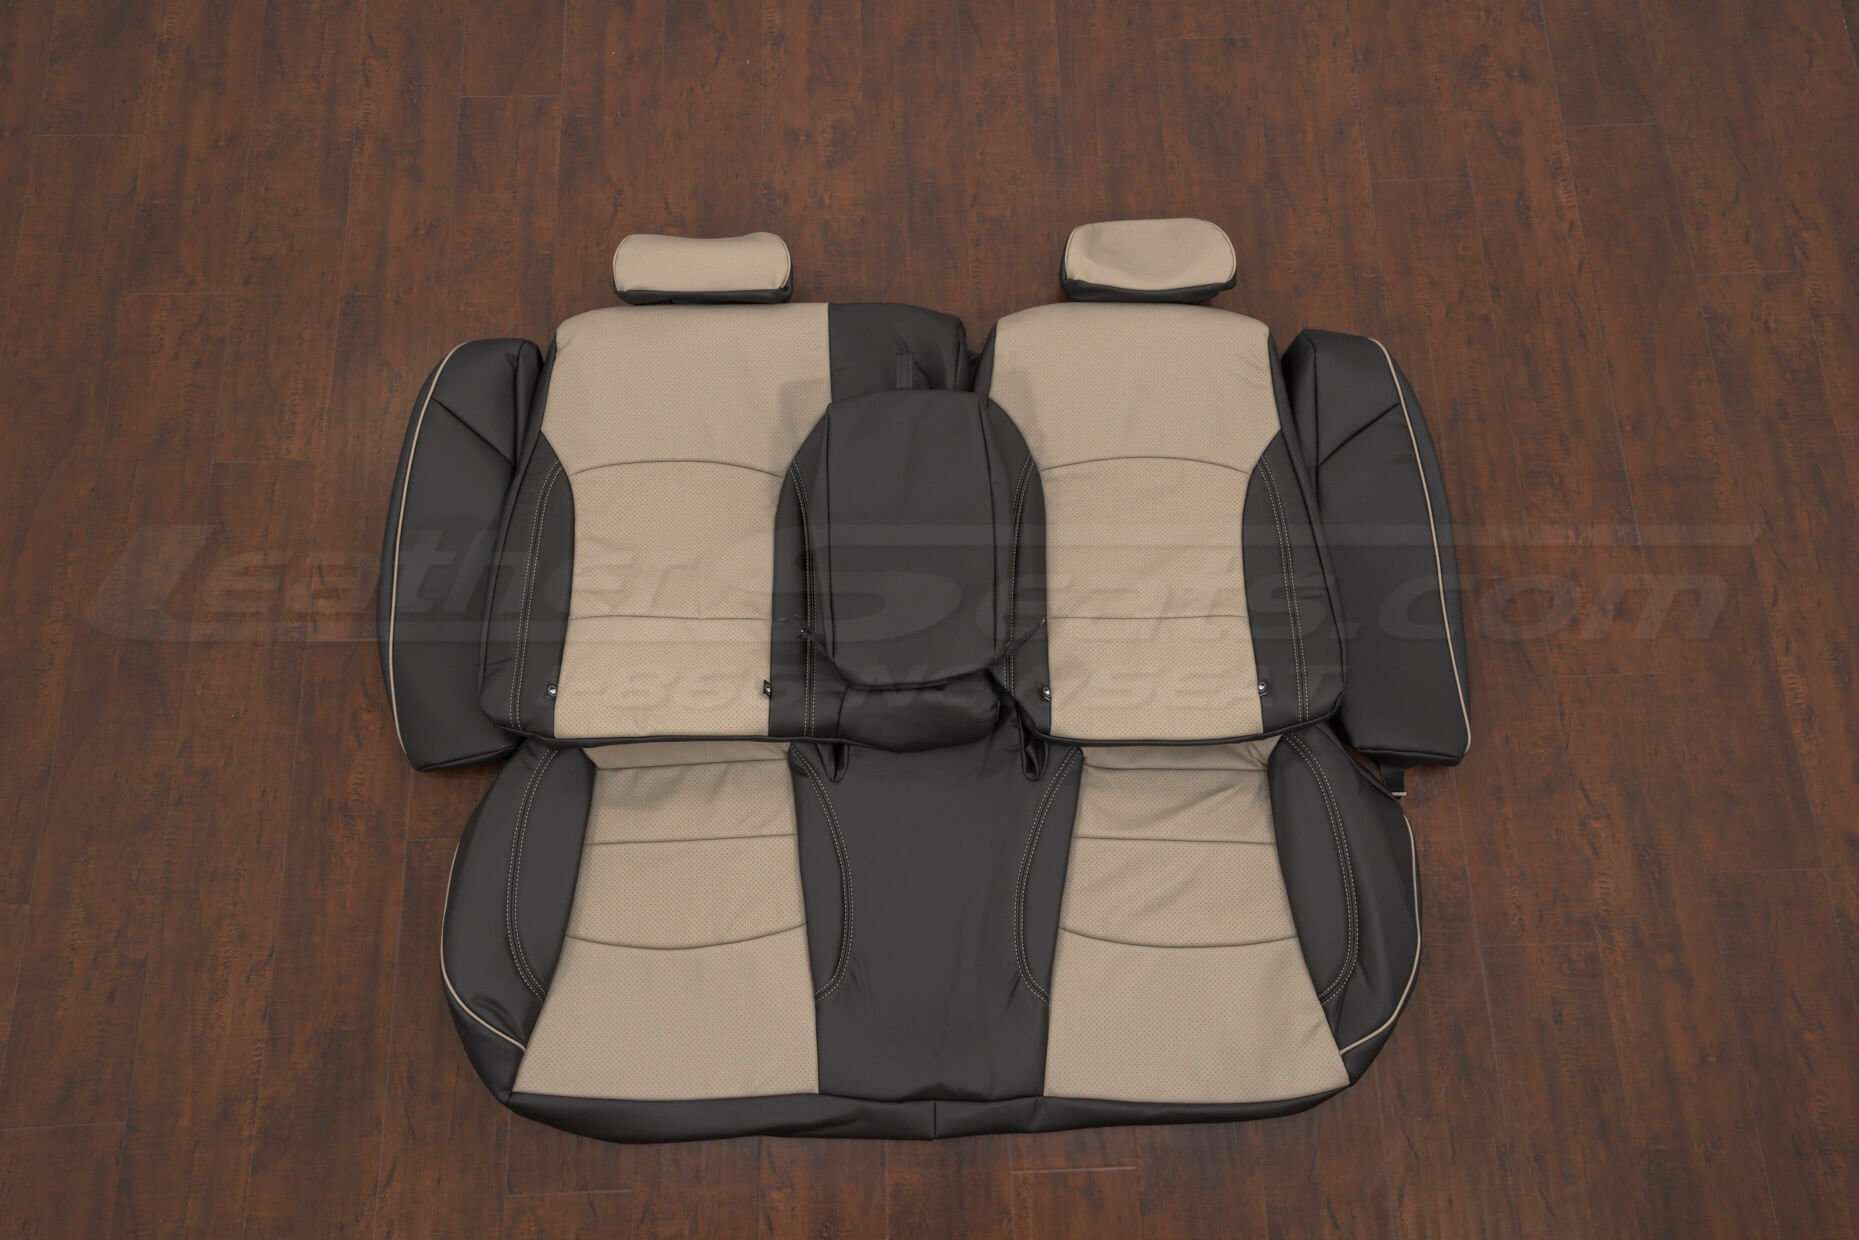 Kia Optima Leather Seat Kit - Black & Ivory - Rear seat upholstery with armrest and bolsters